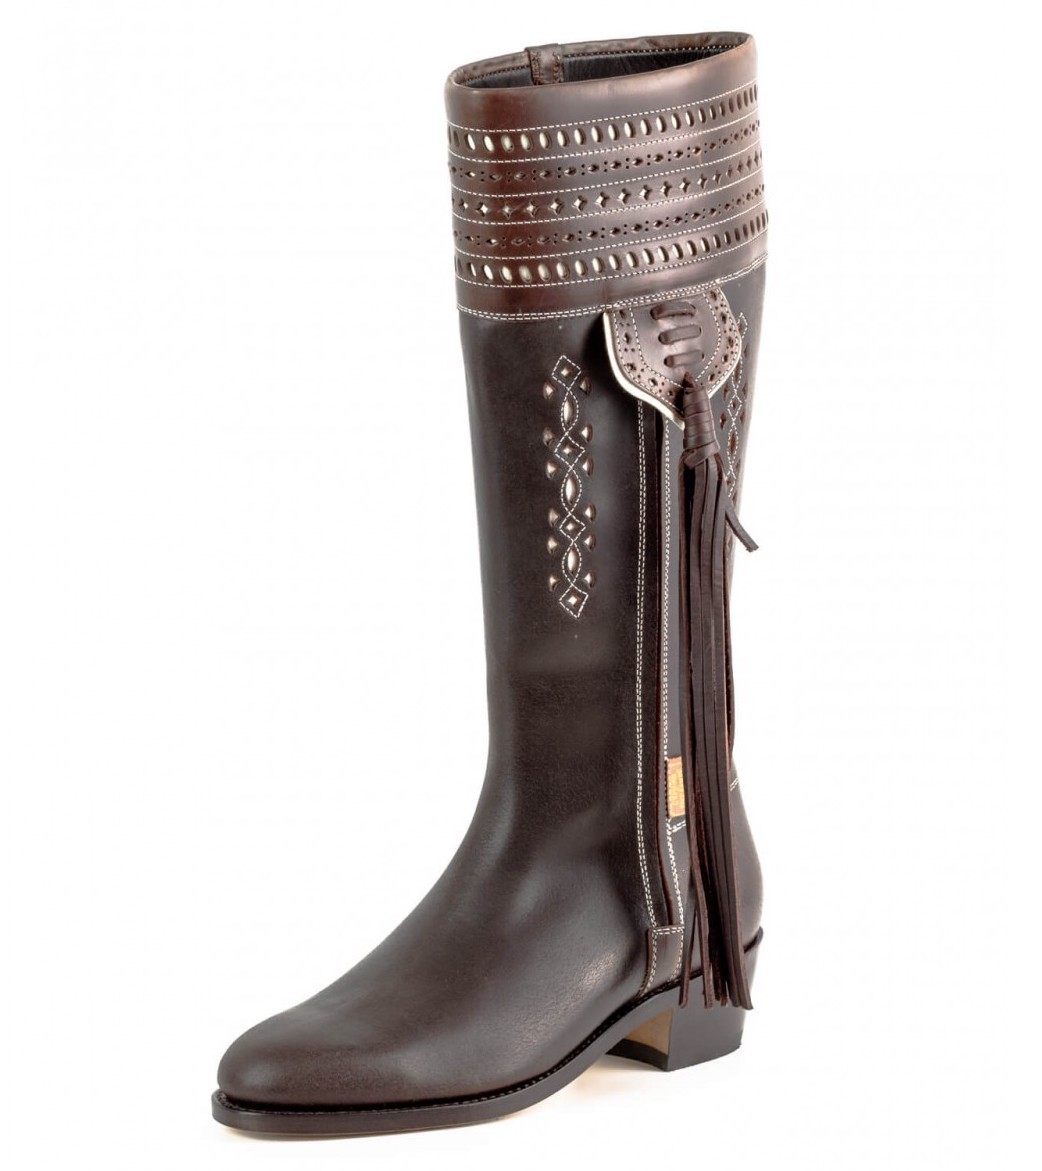 spanish riding boots with tassels